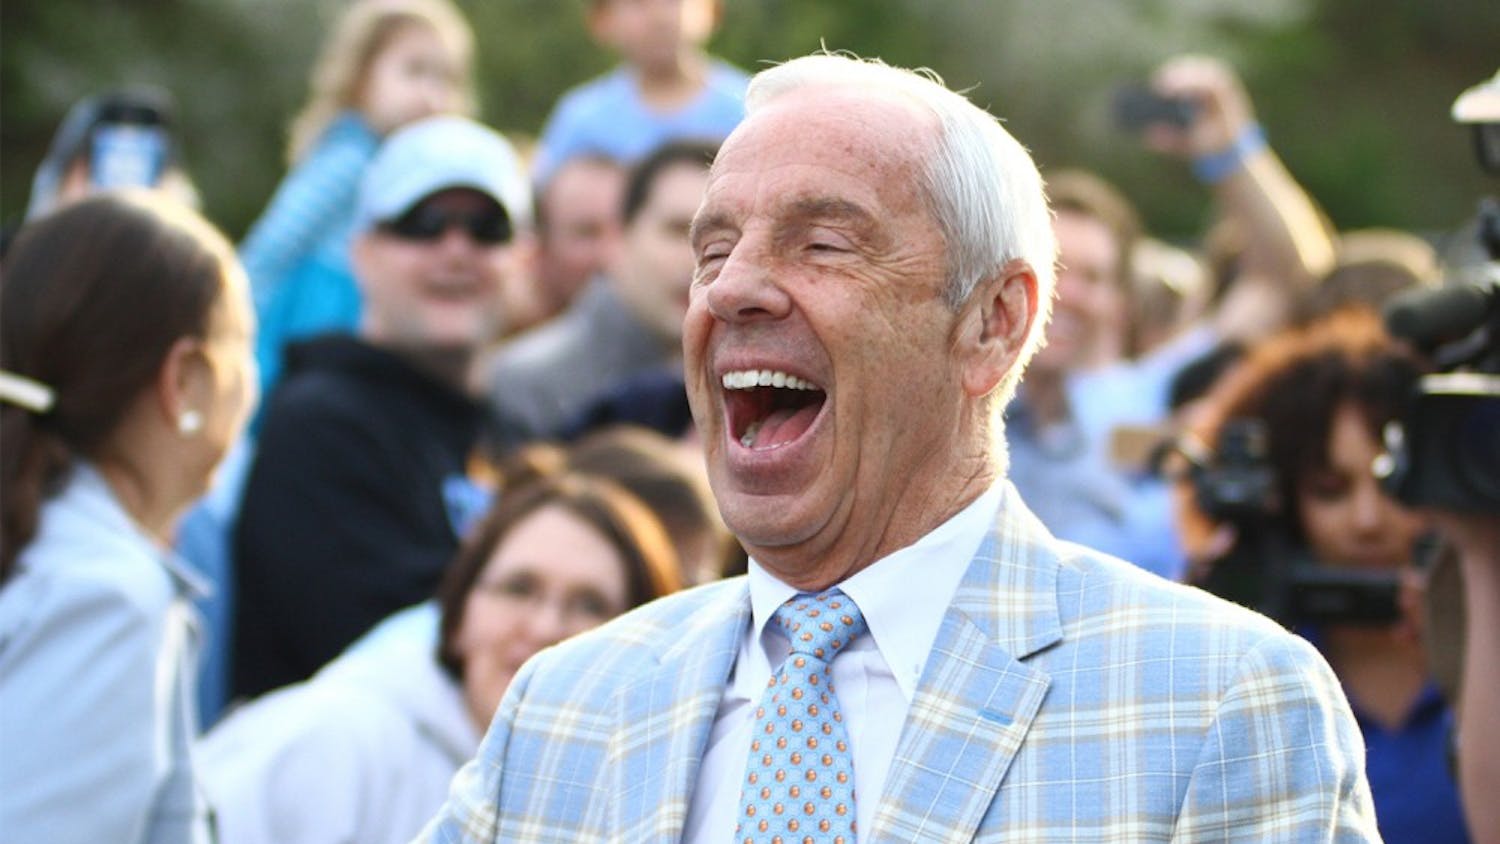 UNC men’s basketball coach Roy Williams laughs and waves to fans before getting on a bus to go to Houston for the Final Four.